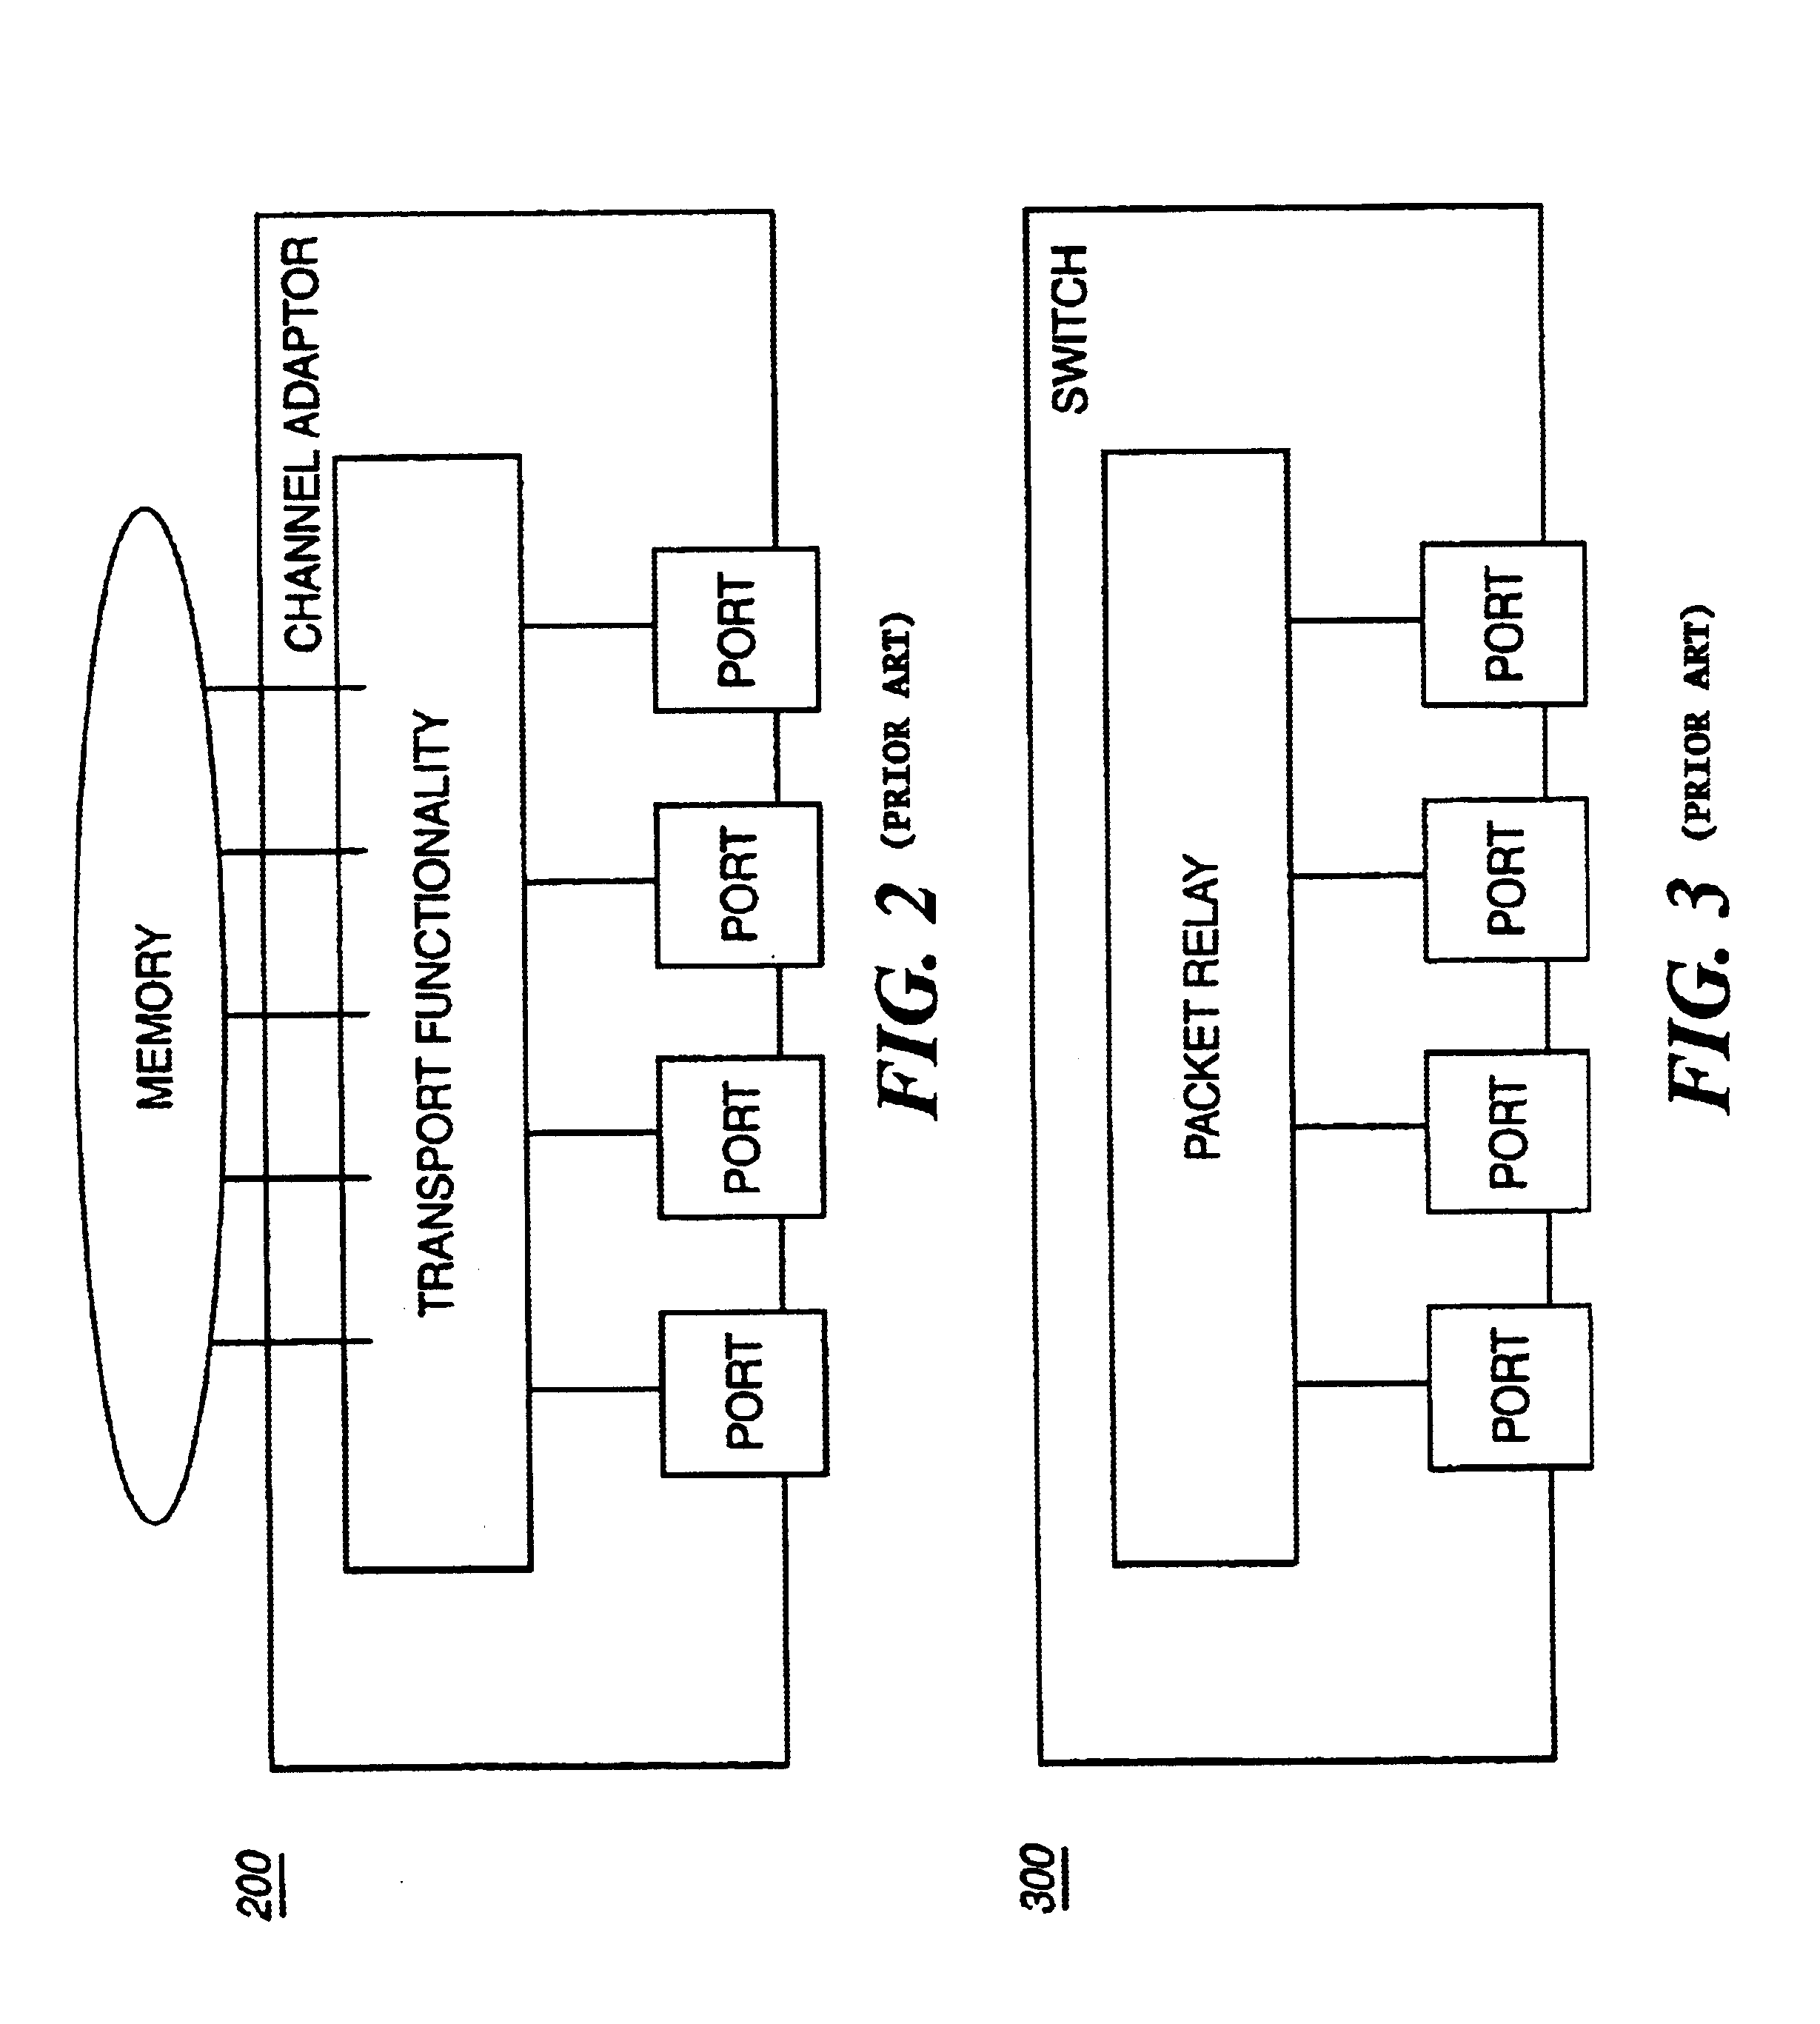 Buffer management architecture and method for an infiniband subnetwork